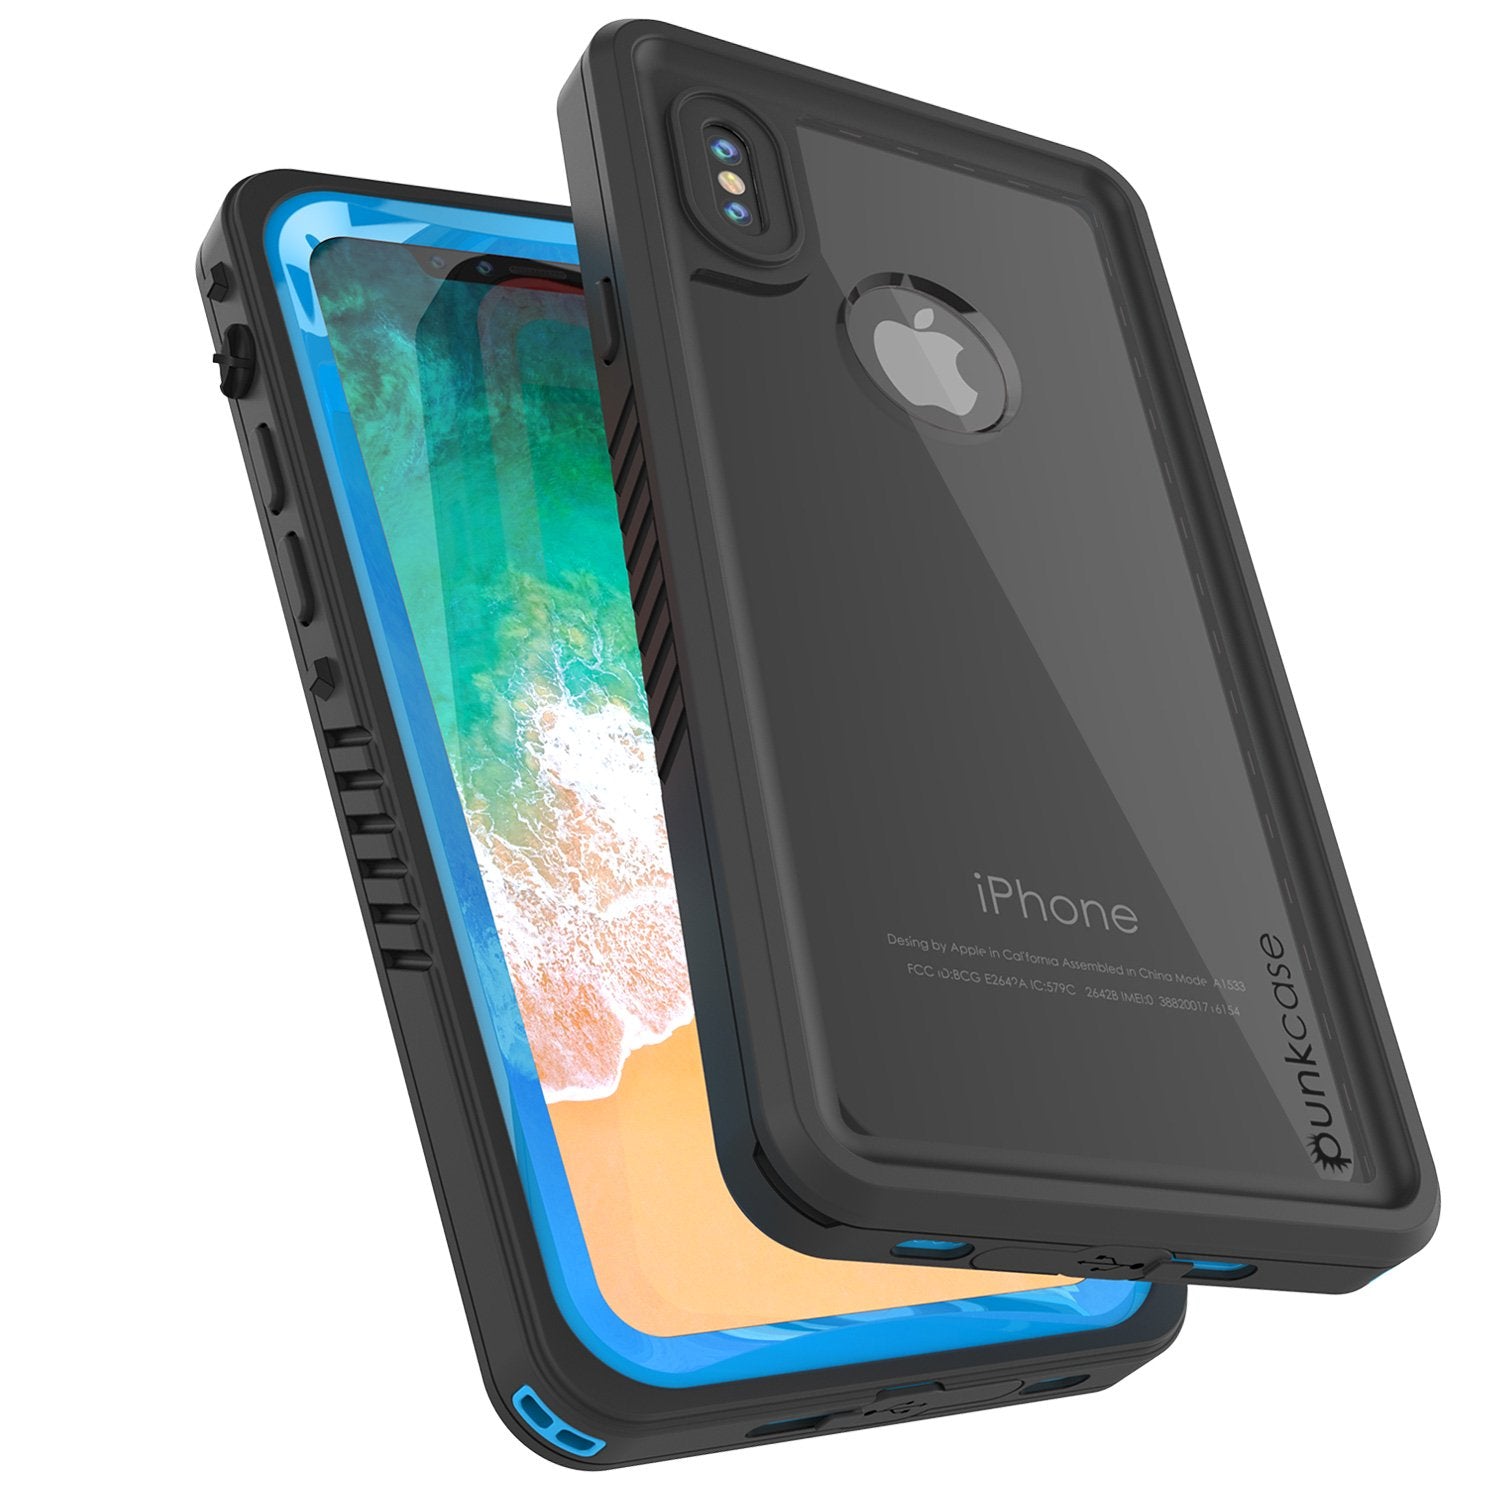 iPhone X Case, Extreme Series Armor Cover W/Screen Protector [BLACK]